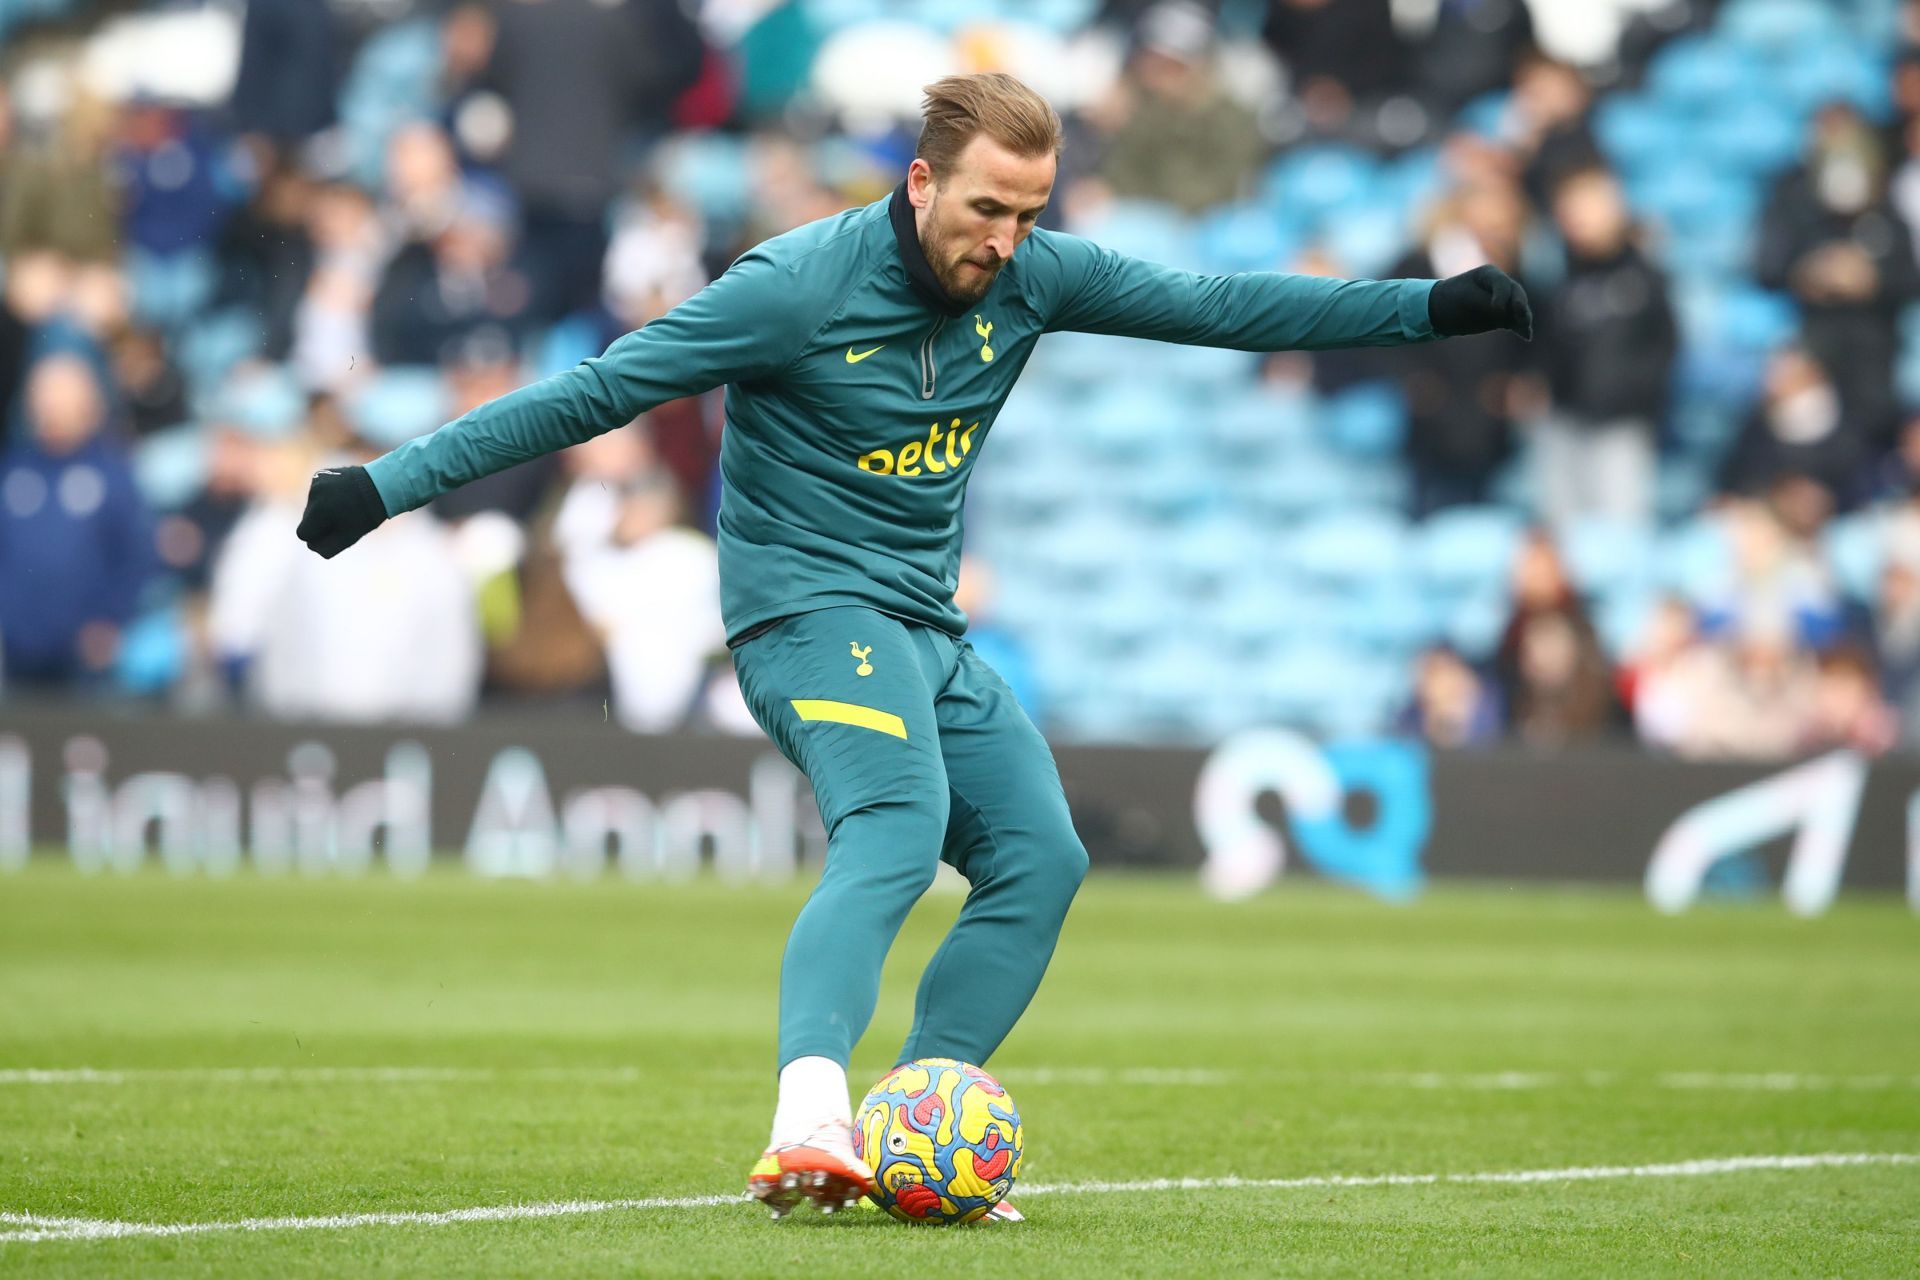 Harry kane in warm up at Leeds United - Premier League